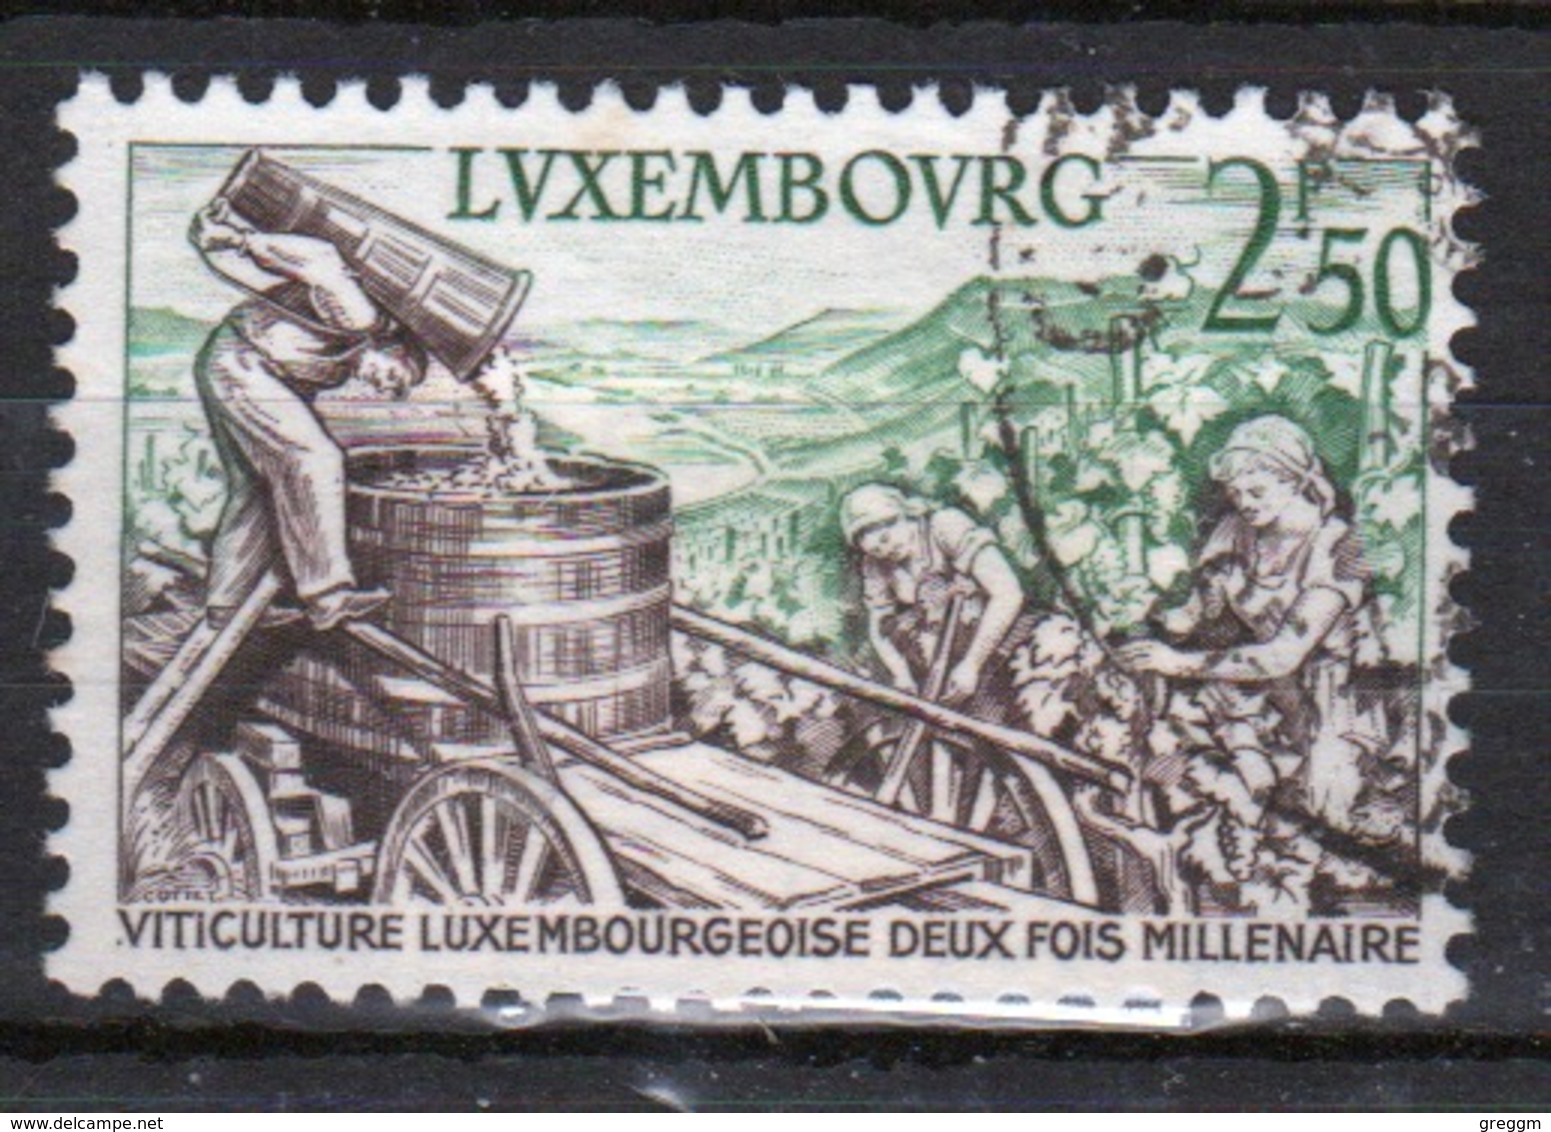 Luxembourg 1958 Single 2f 50 Commemorative Stamp Celebrating Wine Industry. - Used Stamps